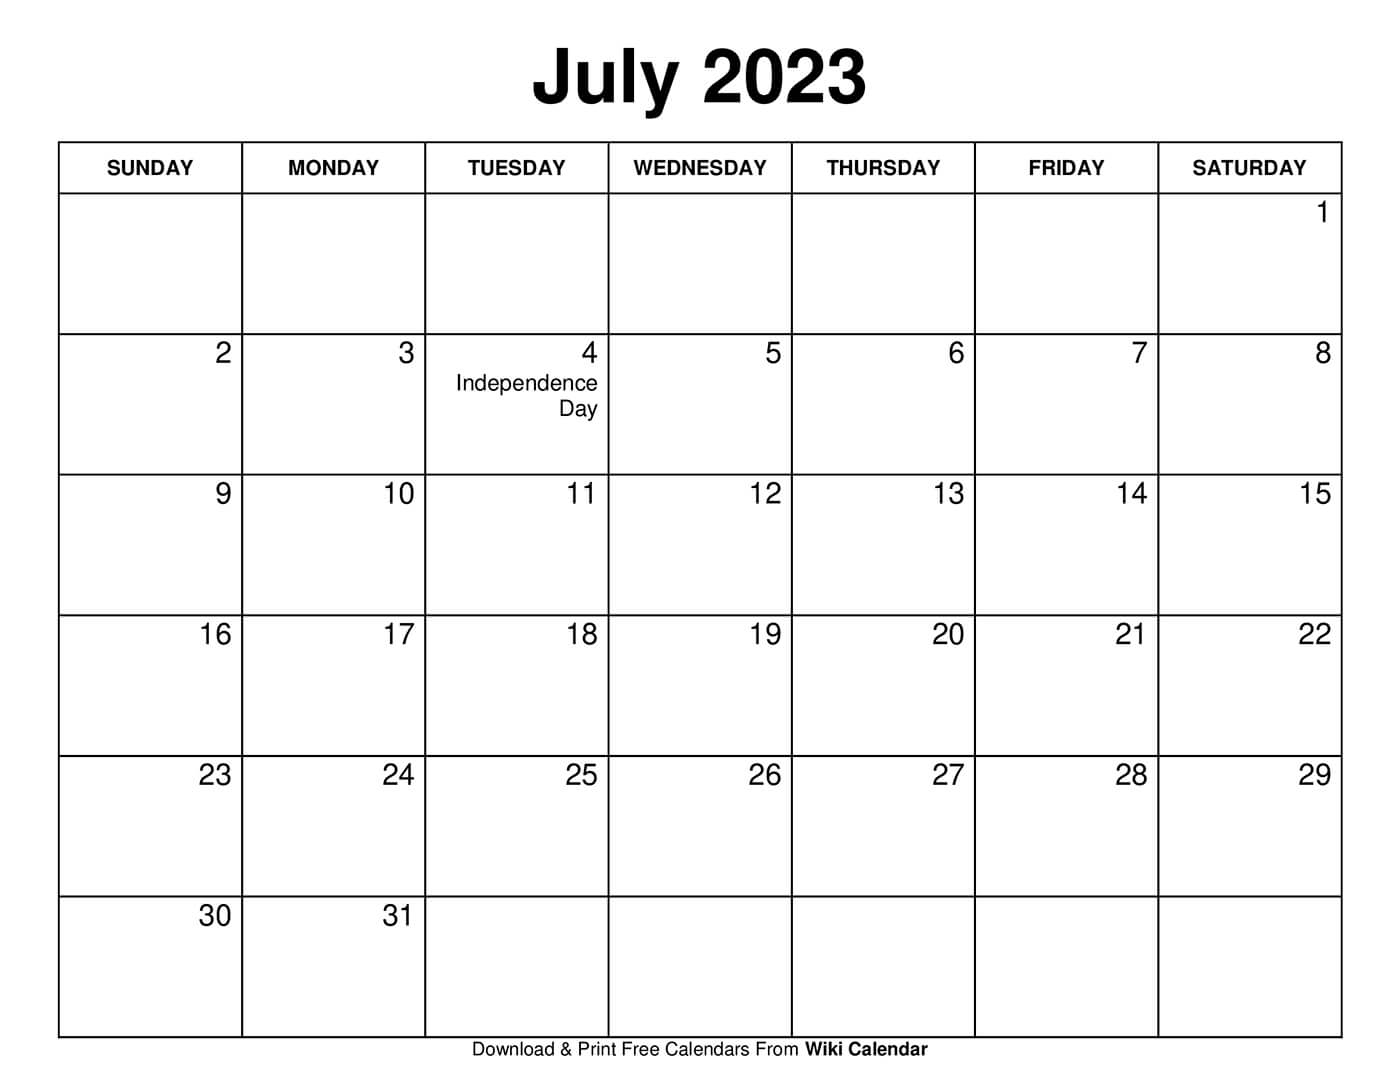 july-2023-calendar-printable-free-get-your-hands-on-amazing-free-printables